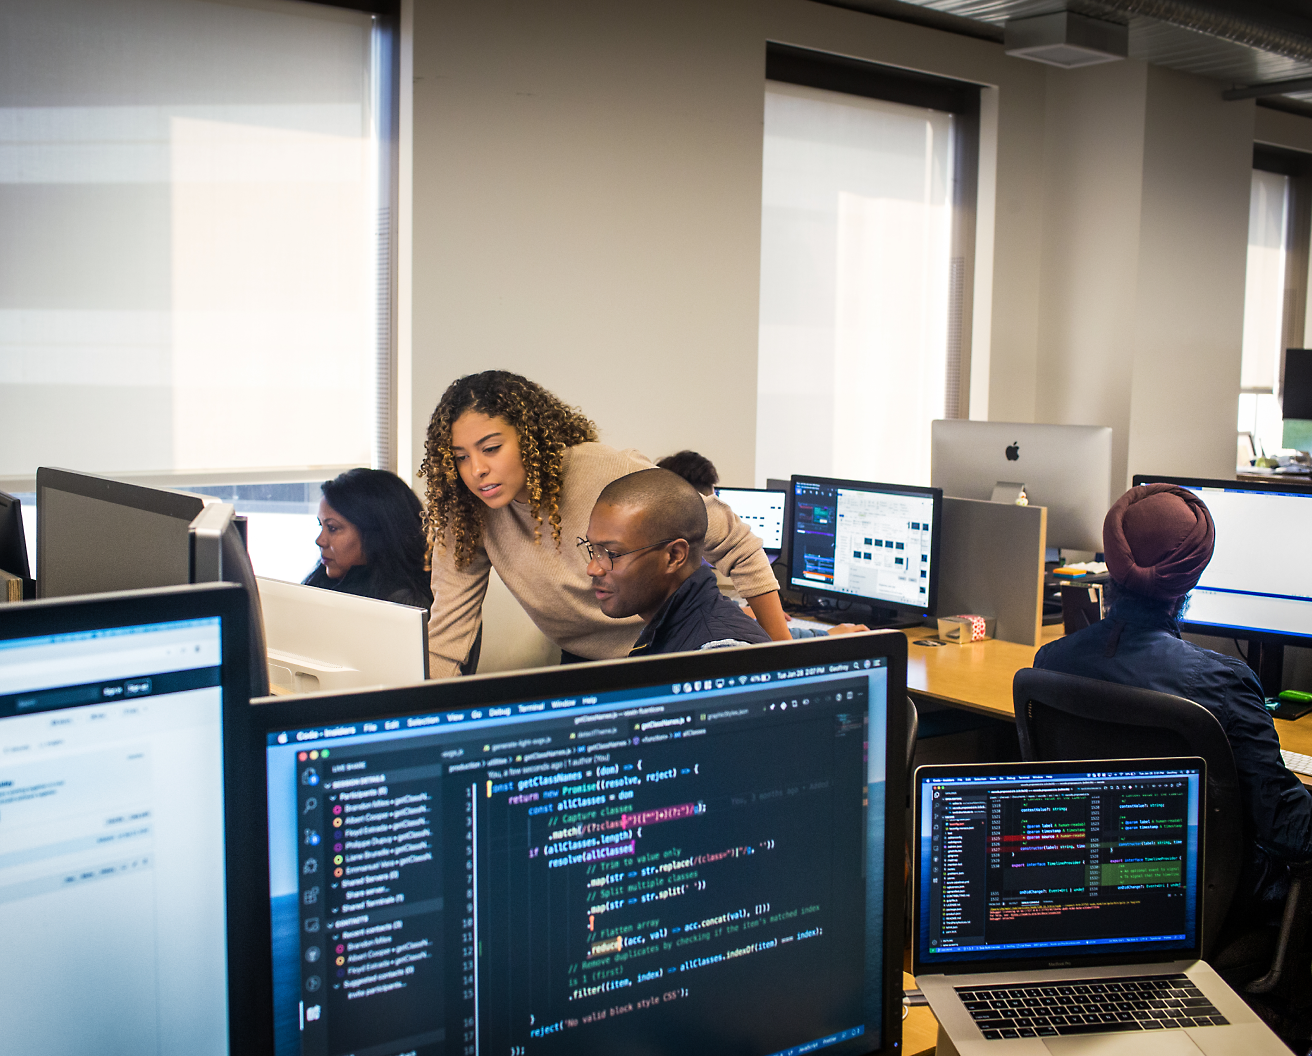 Diverse group of professionals working on computers in an office environment, focusing on screens with various code and data visible.